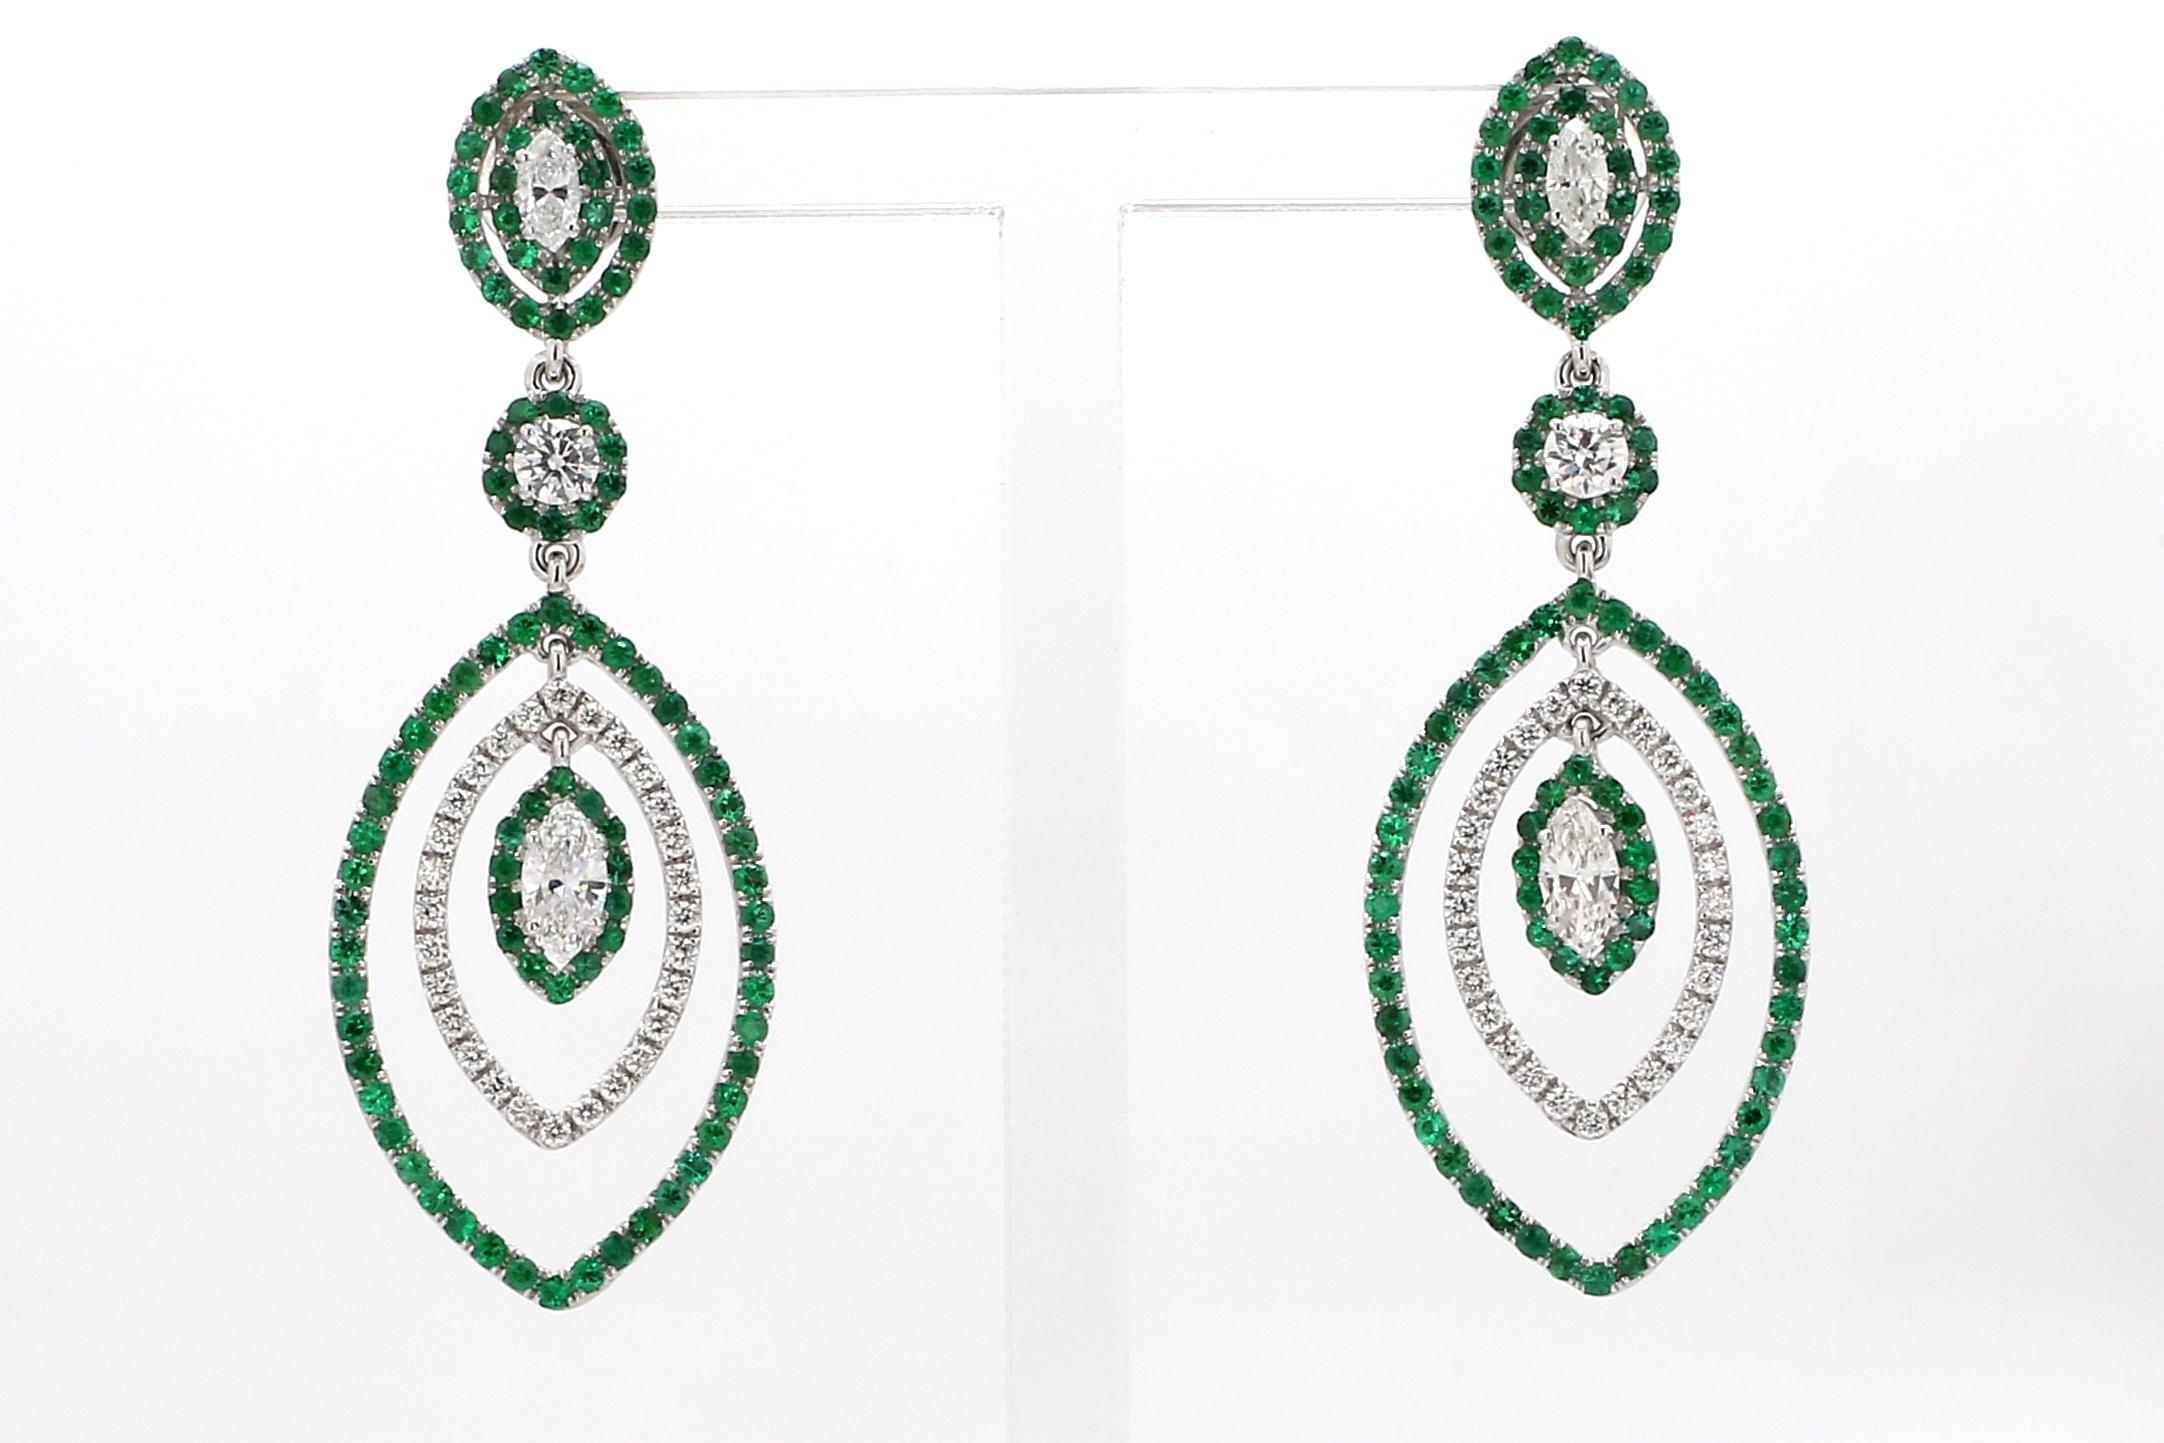 A Beautiful Handcrafted Marquise Shape Earring in 18 karat White Gold with Natural Brilliant Cut Colorless Diamond And Zambian Mined Emerald. A Statement piece for Evening Wear

Natural Diamond Details
Pieces : 62 Pieces
Weight : 1.48 Carat 
Clarity